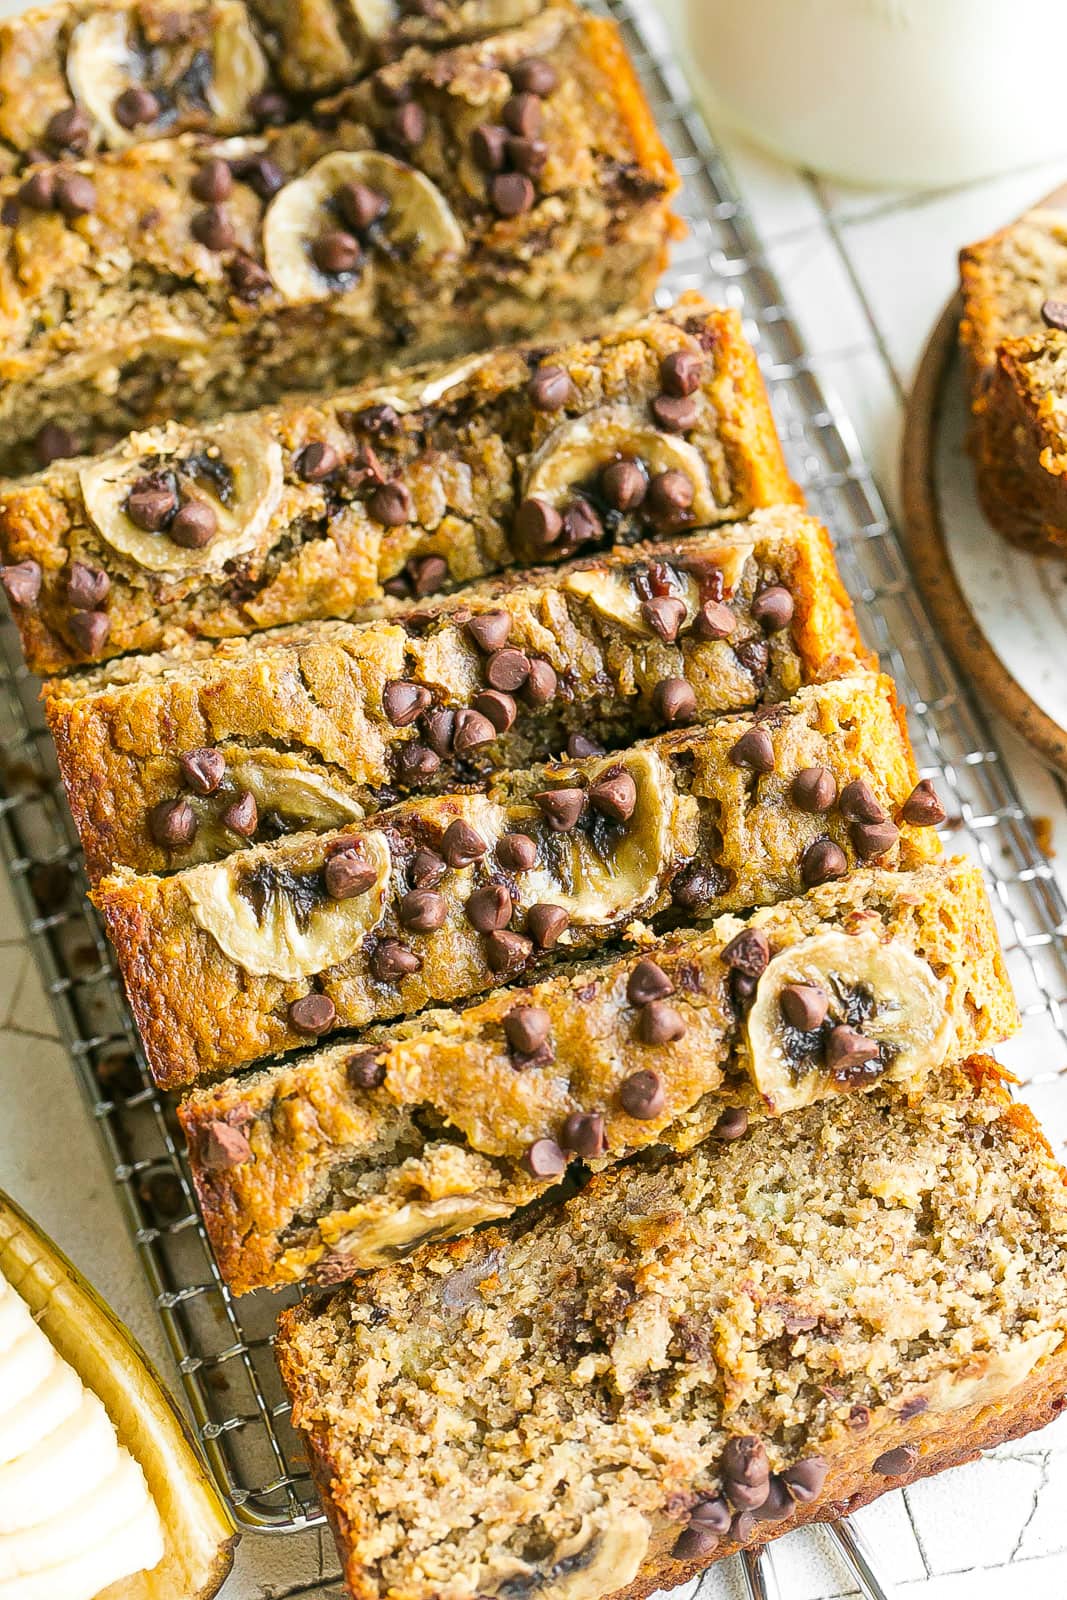 Sliced bread with bananas and chocolate chips.